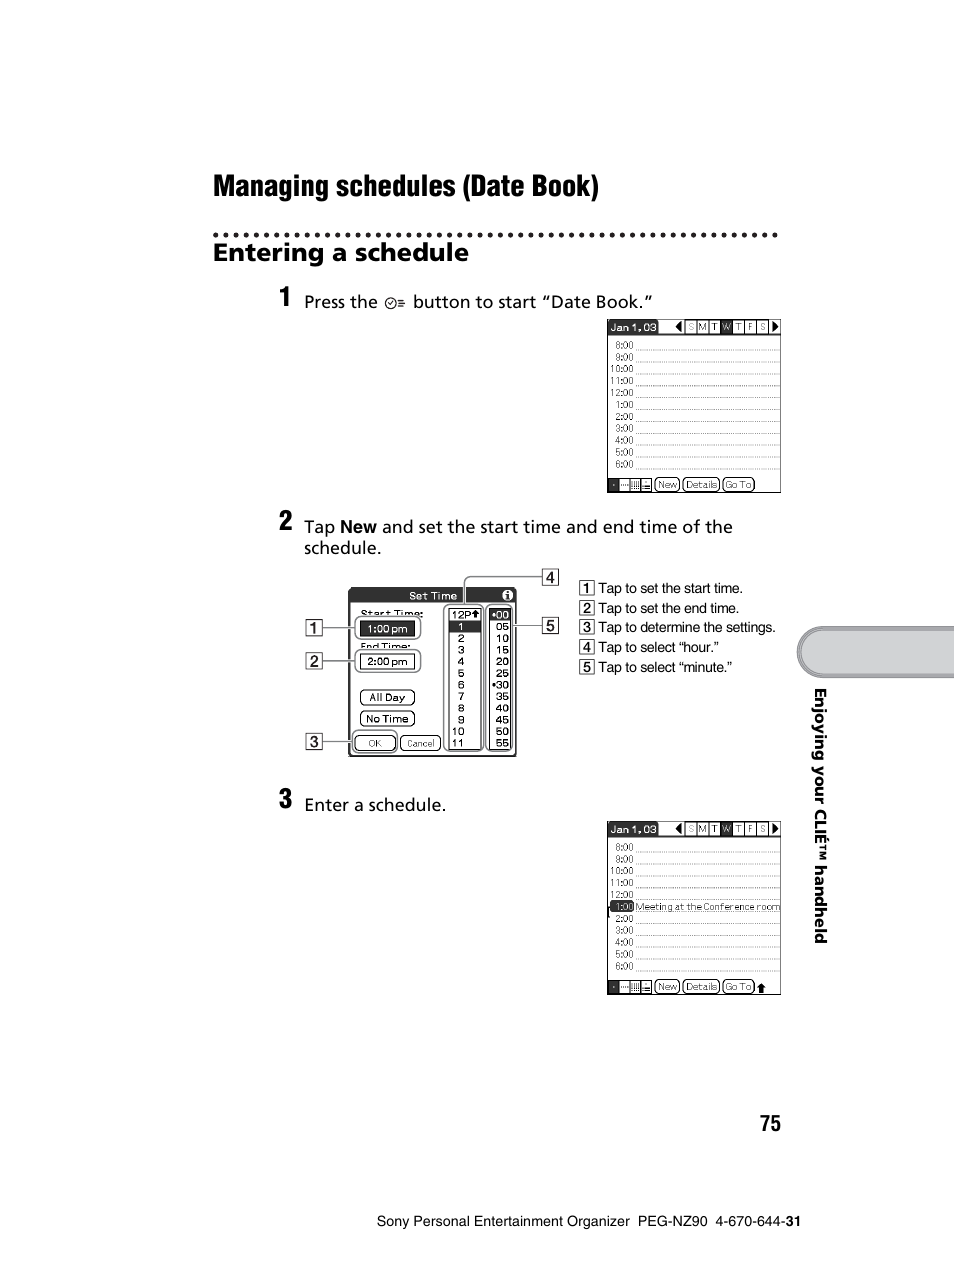 Managing schedules (date book), Entering a schedule | Sony PEG-NZ90 User Manual | Page 75 / 115